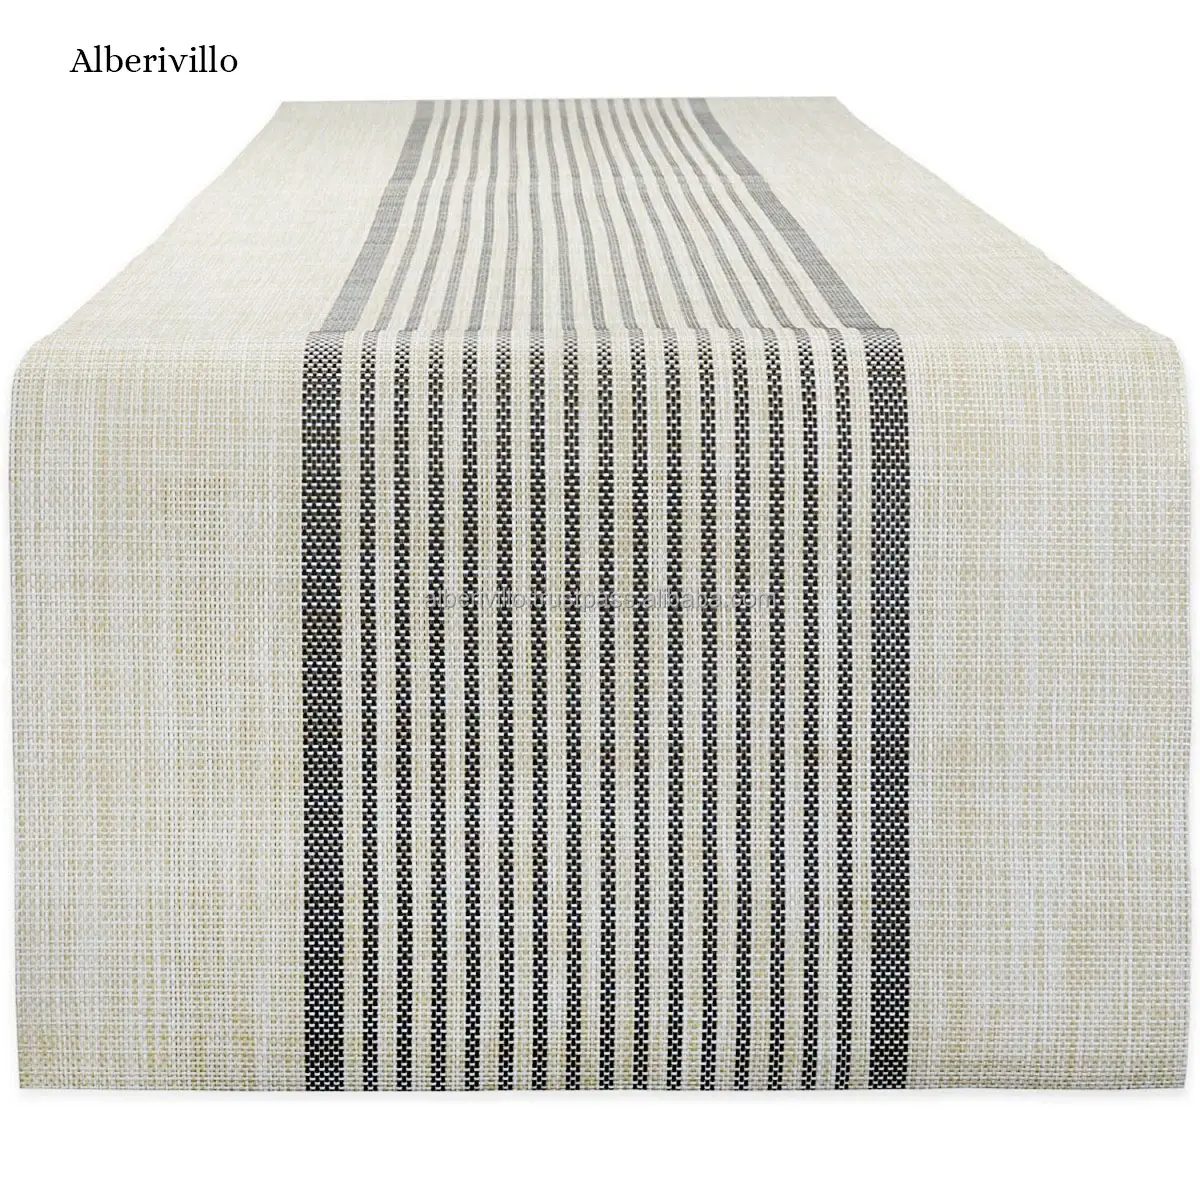 Unique Home Modern Table Runner Fancy Wedding Decor Woven Striped Handloom Table Mats Cotton Table Wedding Cover